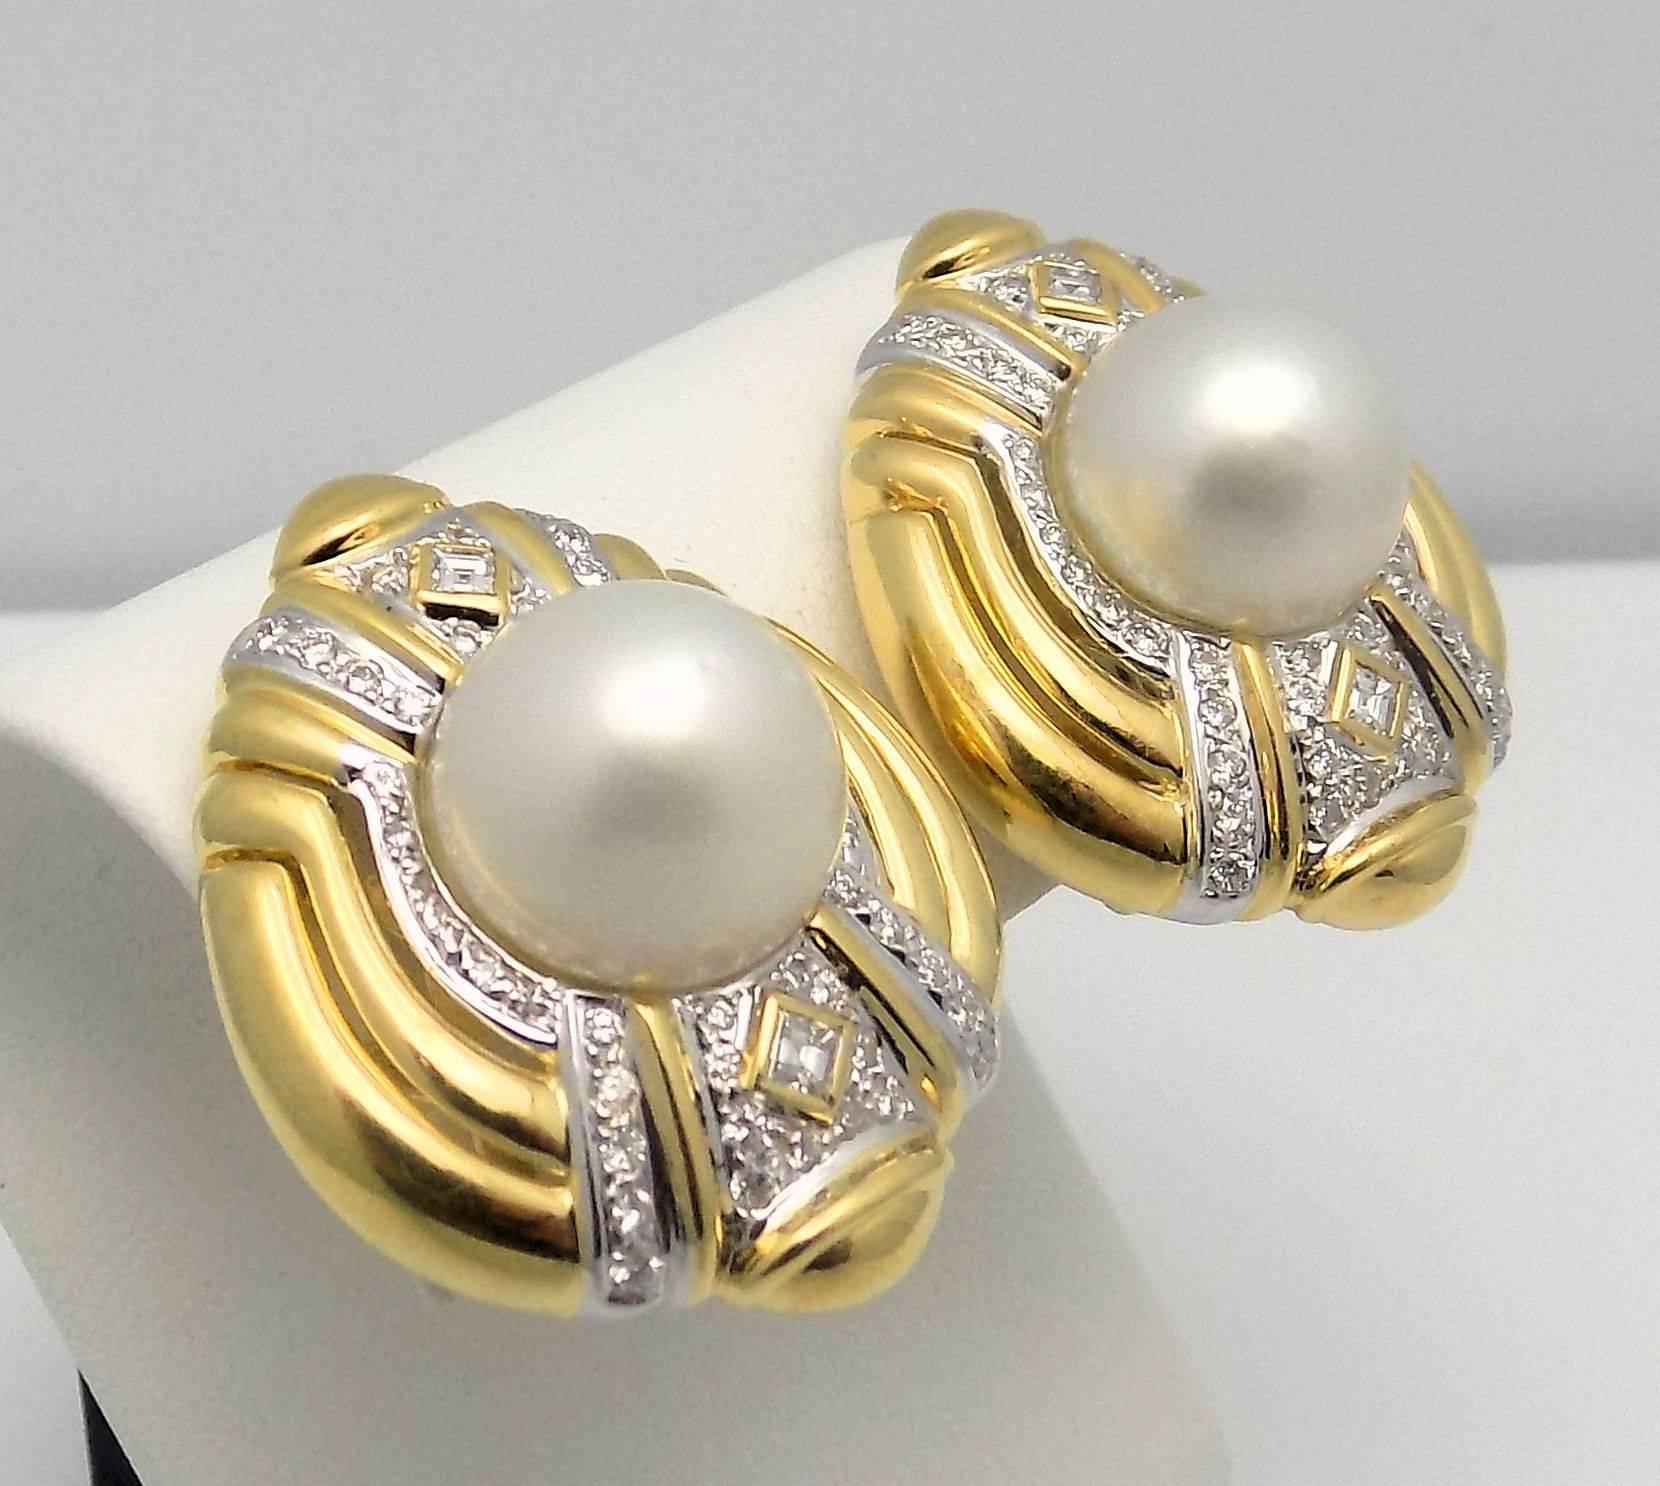 These statement earrings are set in 18 Karat yellow gold with center of round, high dome mobe' cultured pearls.  The pearls measure 13 x 13.5 mm. with bright luster.  There are four square and 88 round brilliant cut diamonds with a combined weight